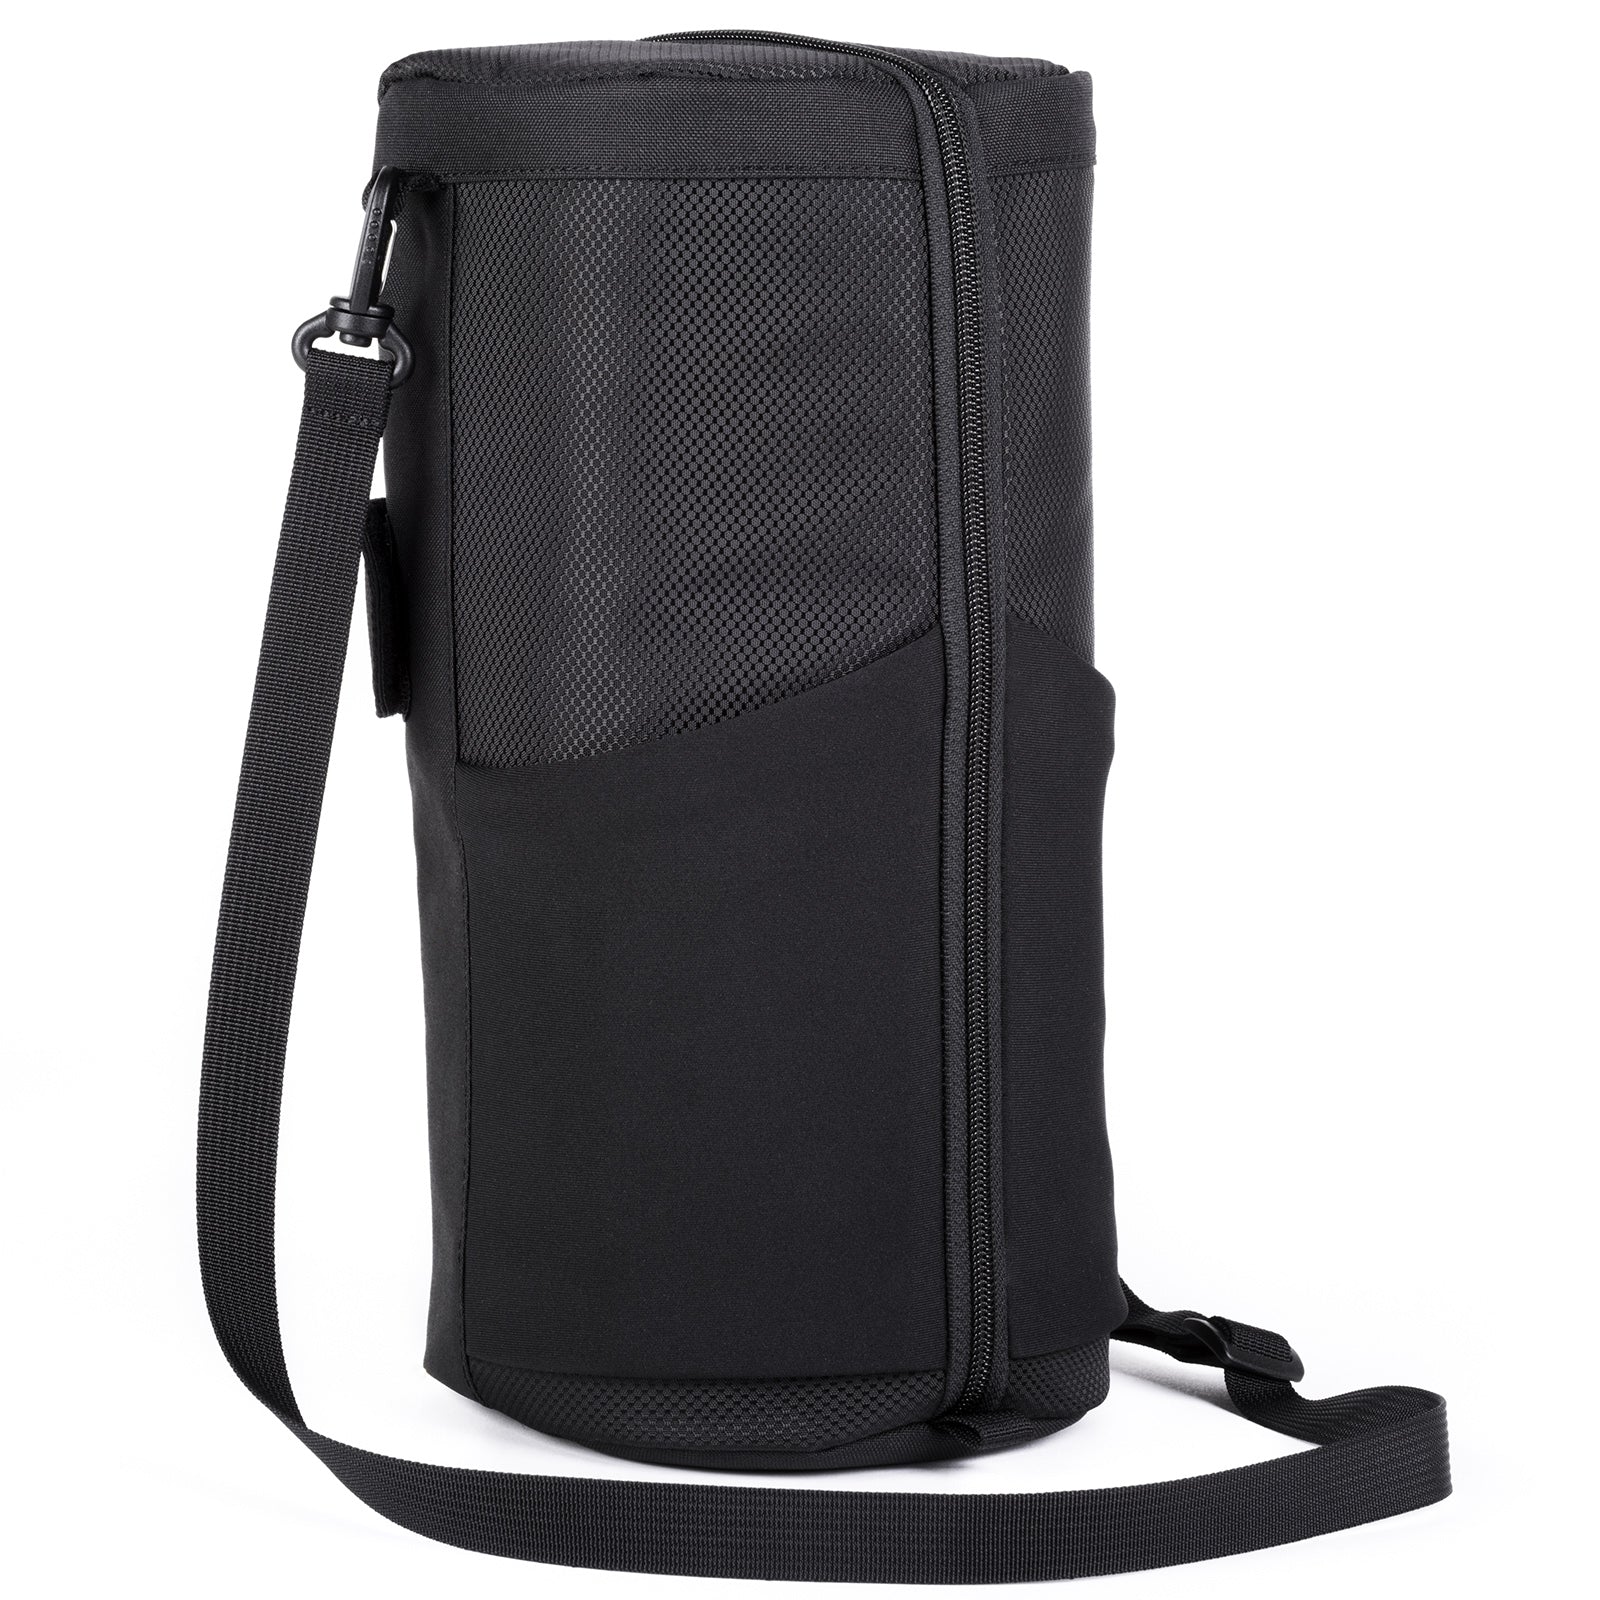 Outer stretch pockets provide space for lens cap or accessories. Shoulder Strap included